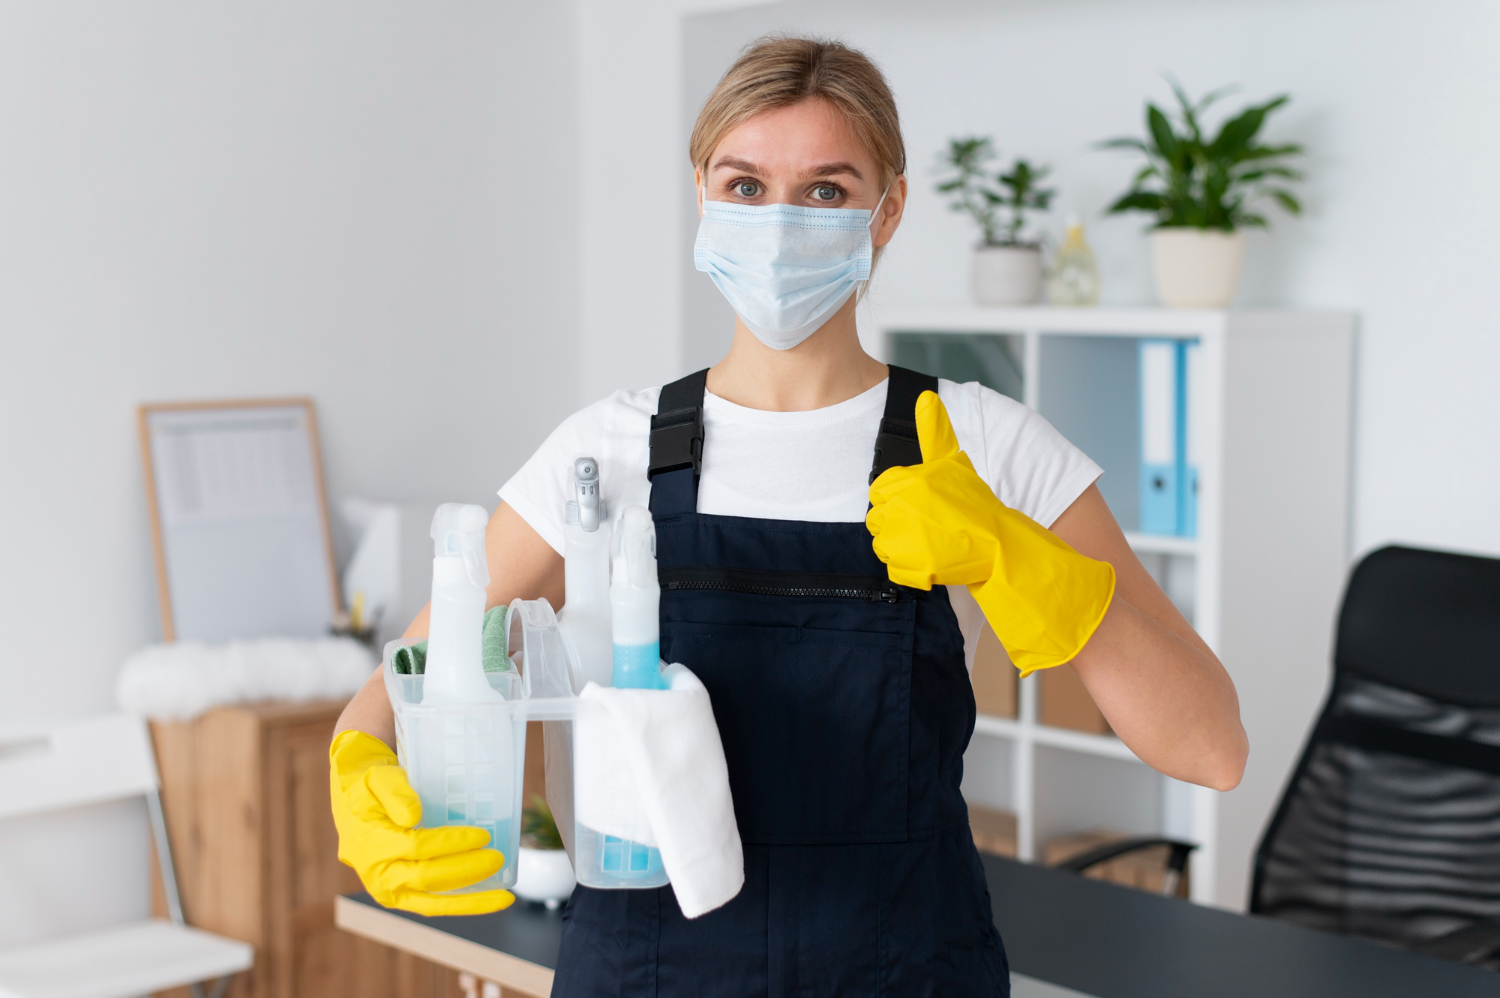 Maid cleaning services